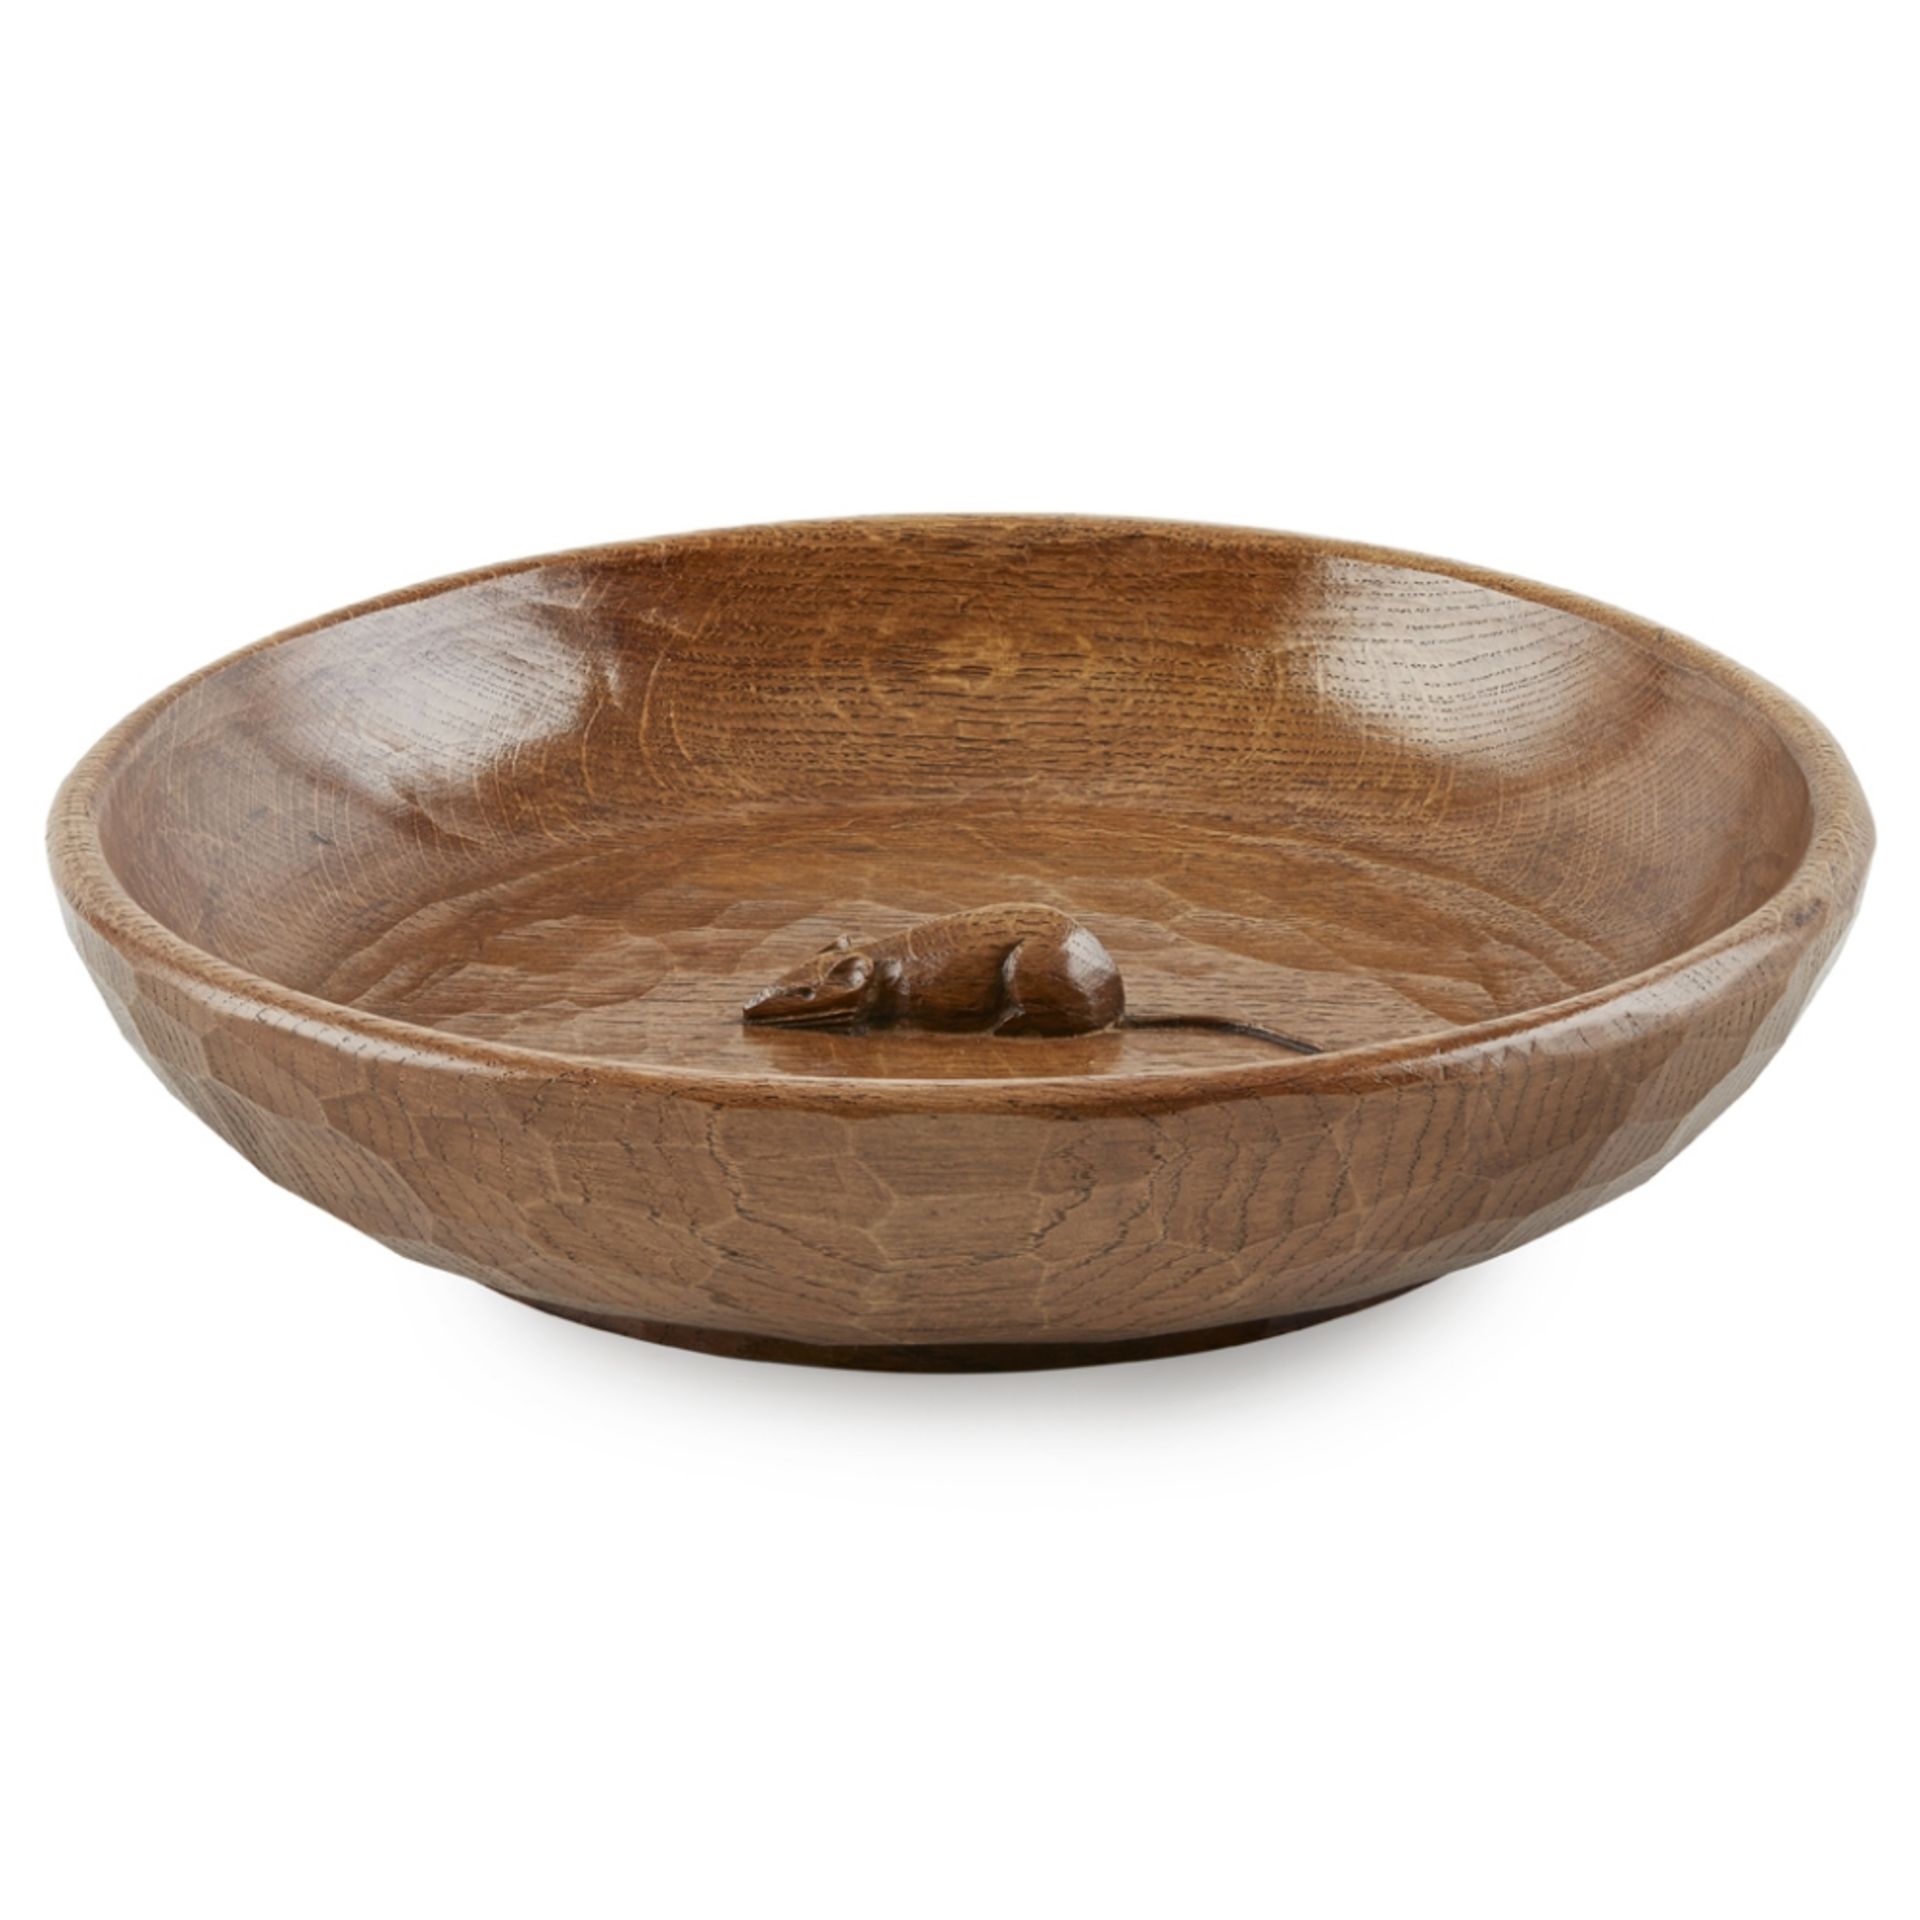 ROBERT 'MOUSEMAN' THOMPSON (1876-1955) LARGE OAK BOWL, 1970s / 1980s of circular form with central